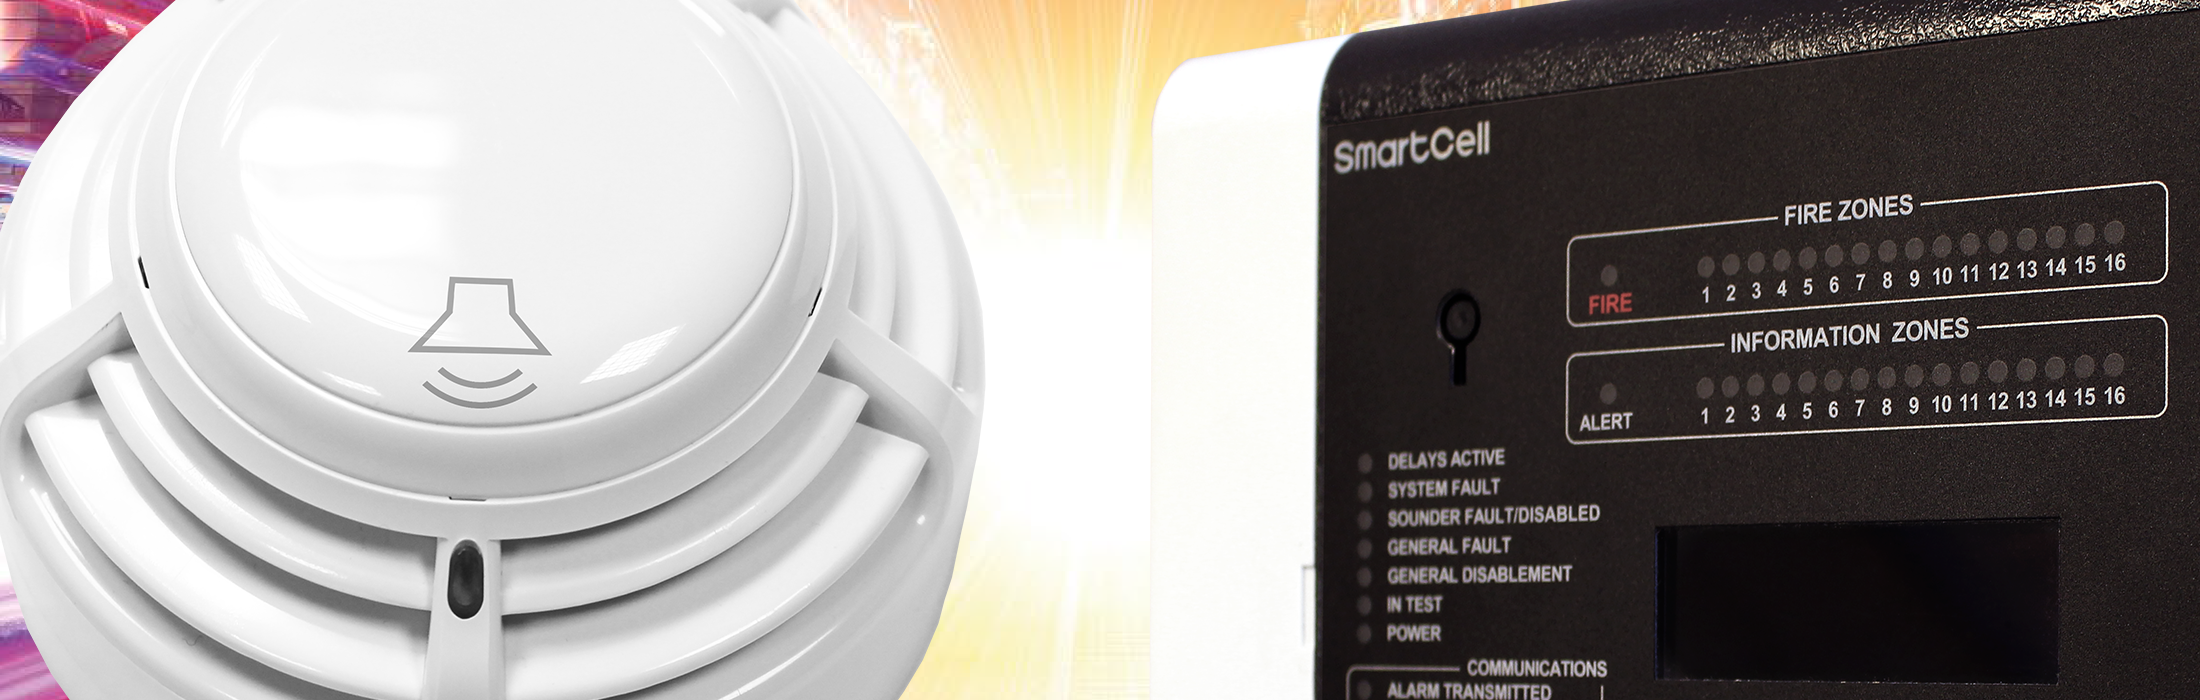 EMS SmartCell